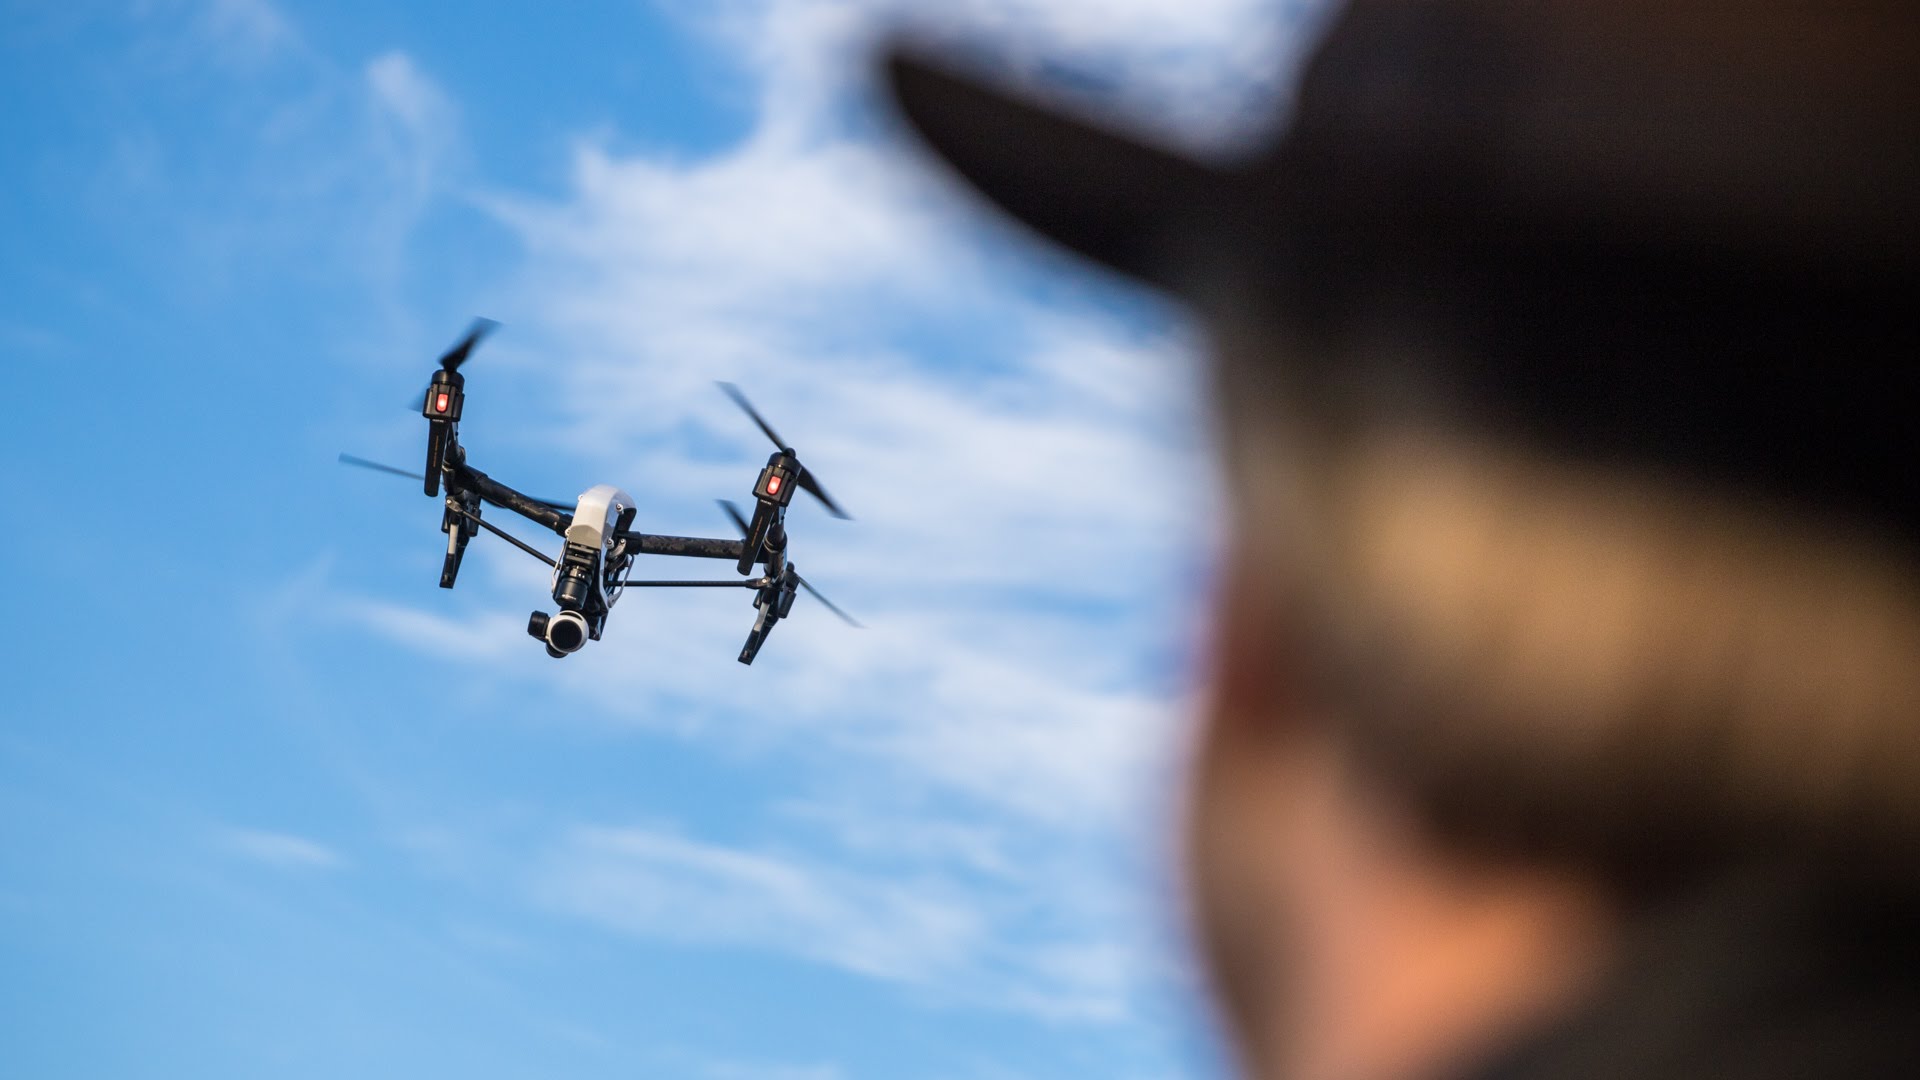 Flying The Dji Inspire Quadcopter With Adam Savage